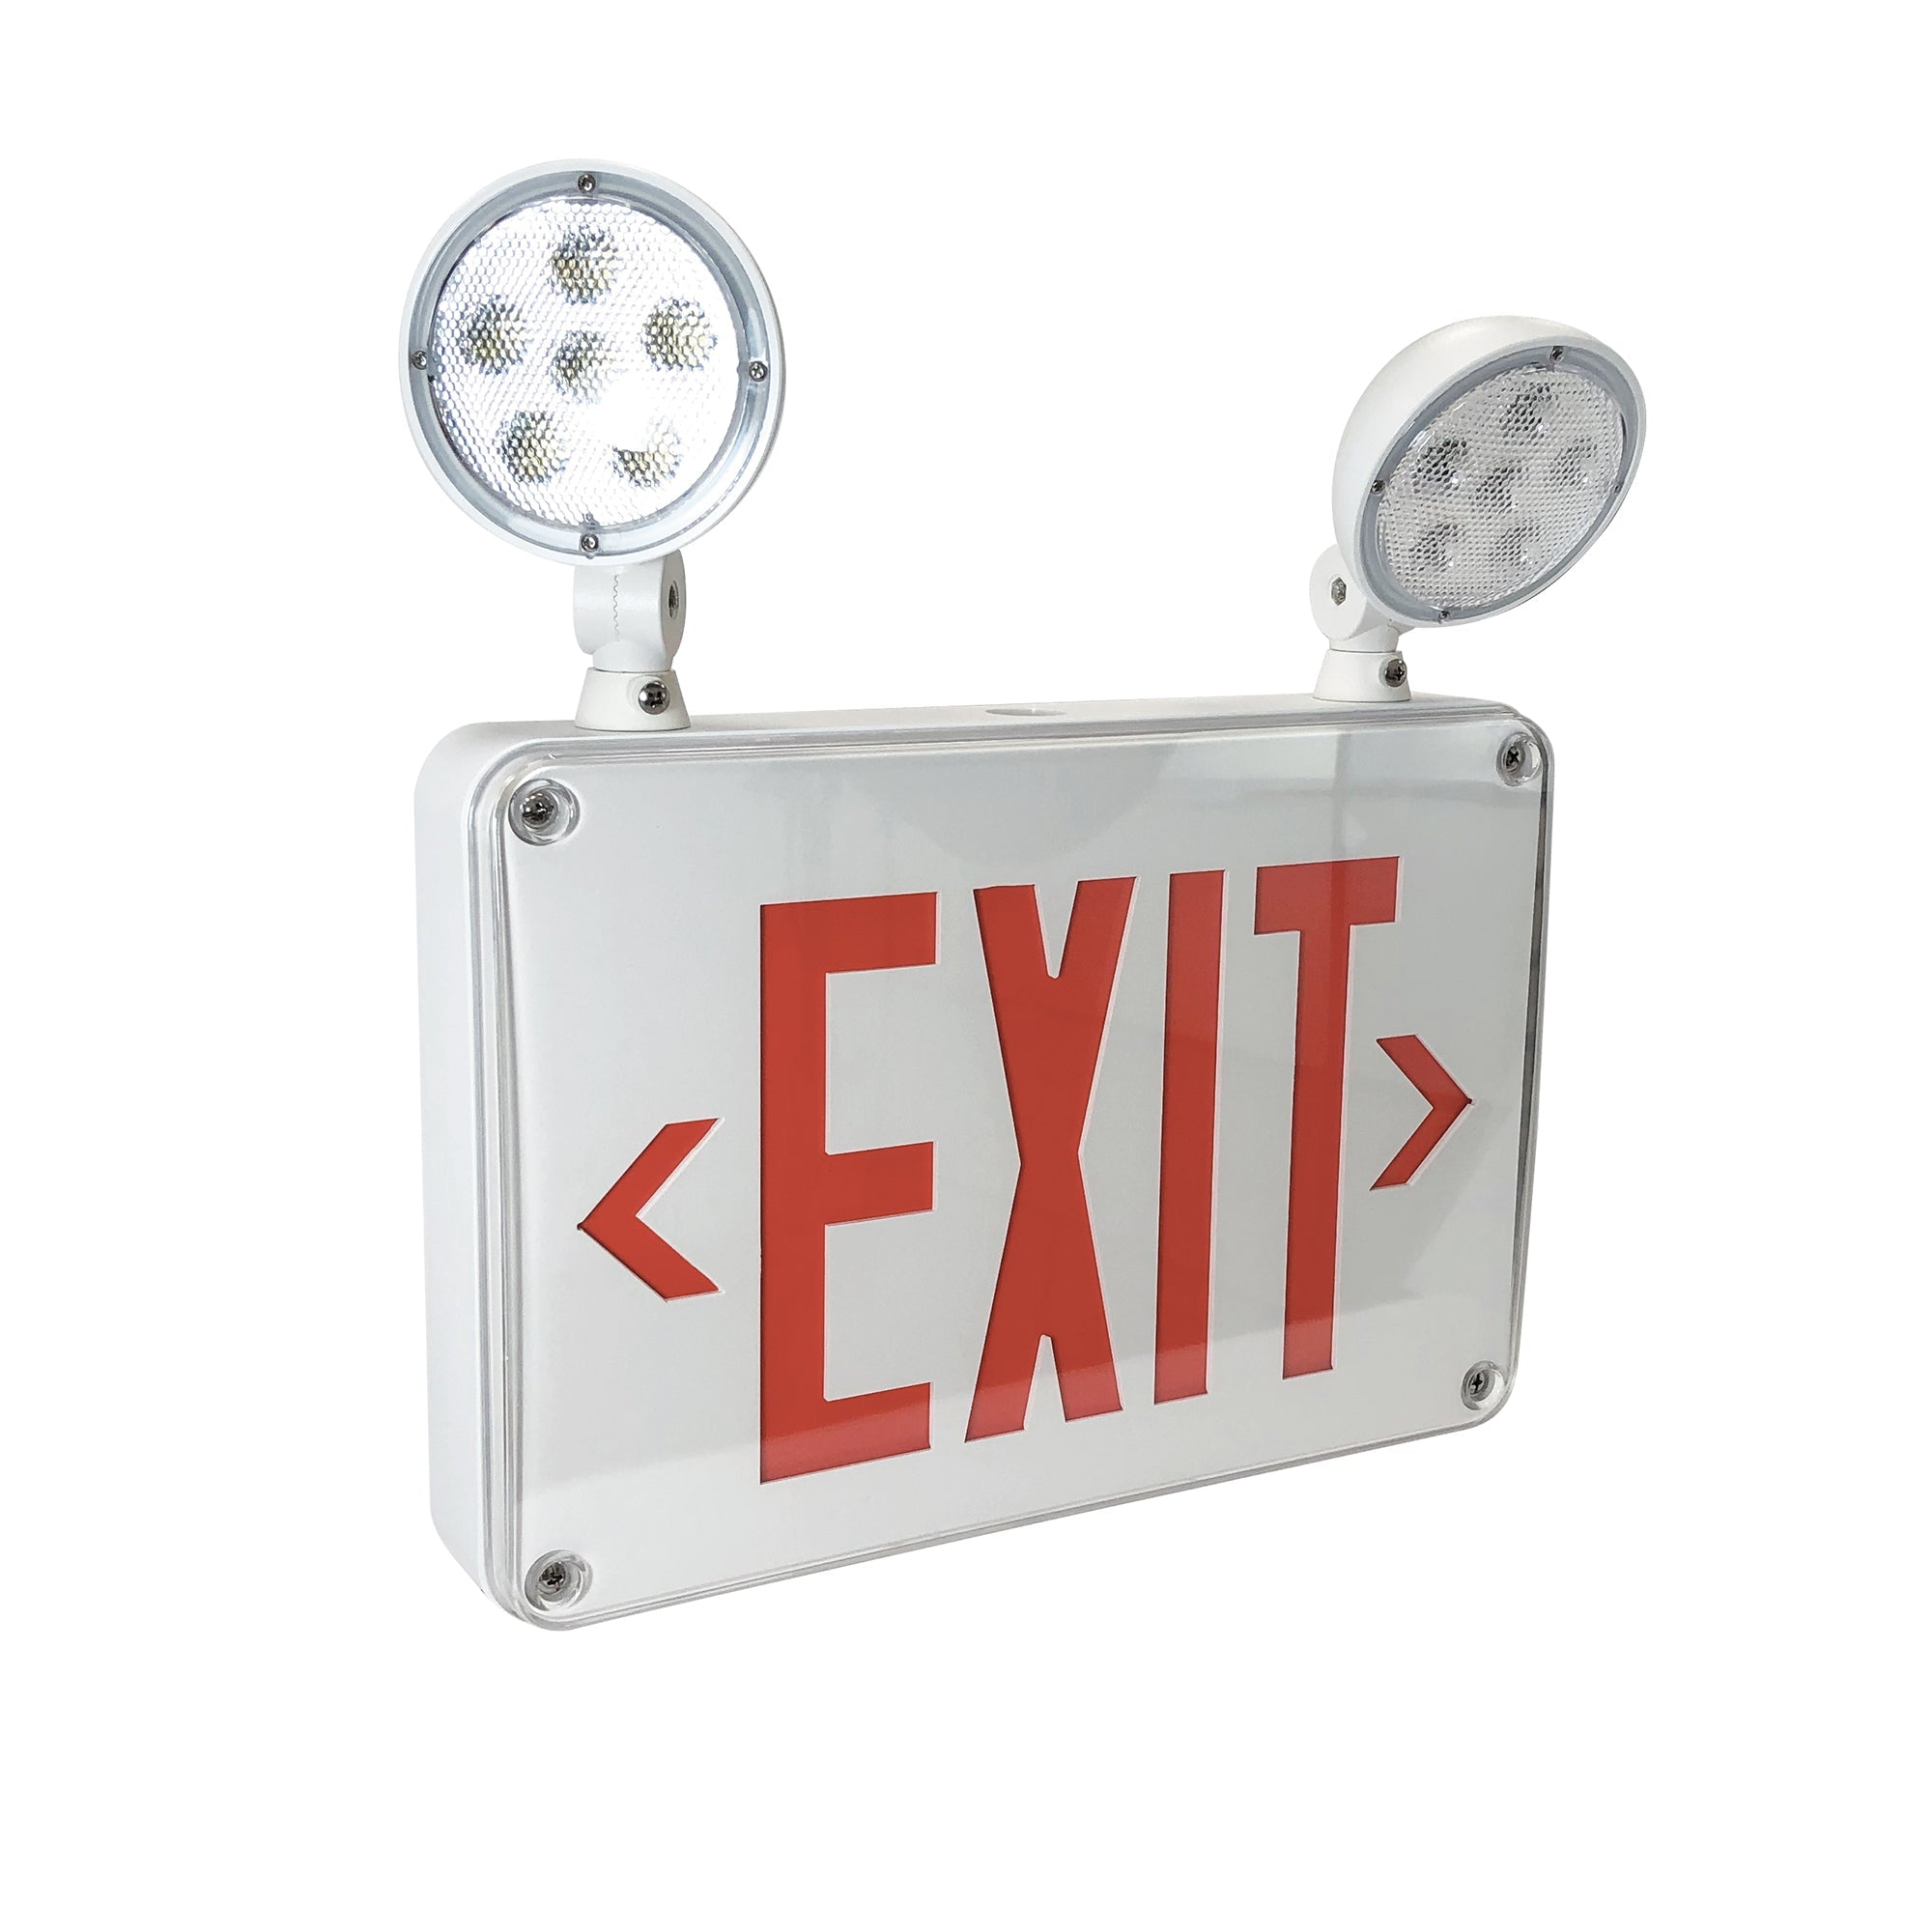 Nora Lighting NEX-720-LED/R-CC - Exit / Emergency - LED Self-Diagnostic Wet/Cold Location Exit & Emergency Sign w/ Battery Backup & Remote Capability, White Housing w/ Red Letters, Cold Weather Location